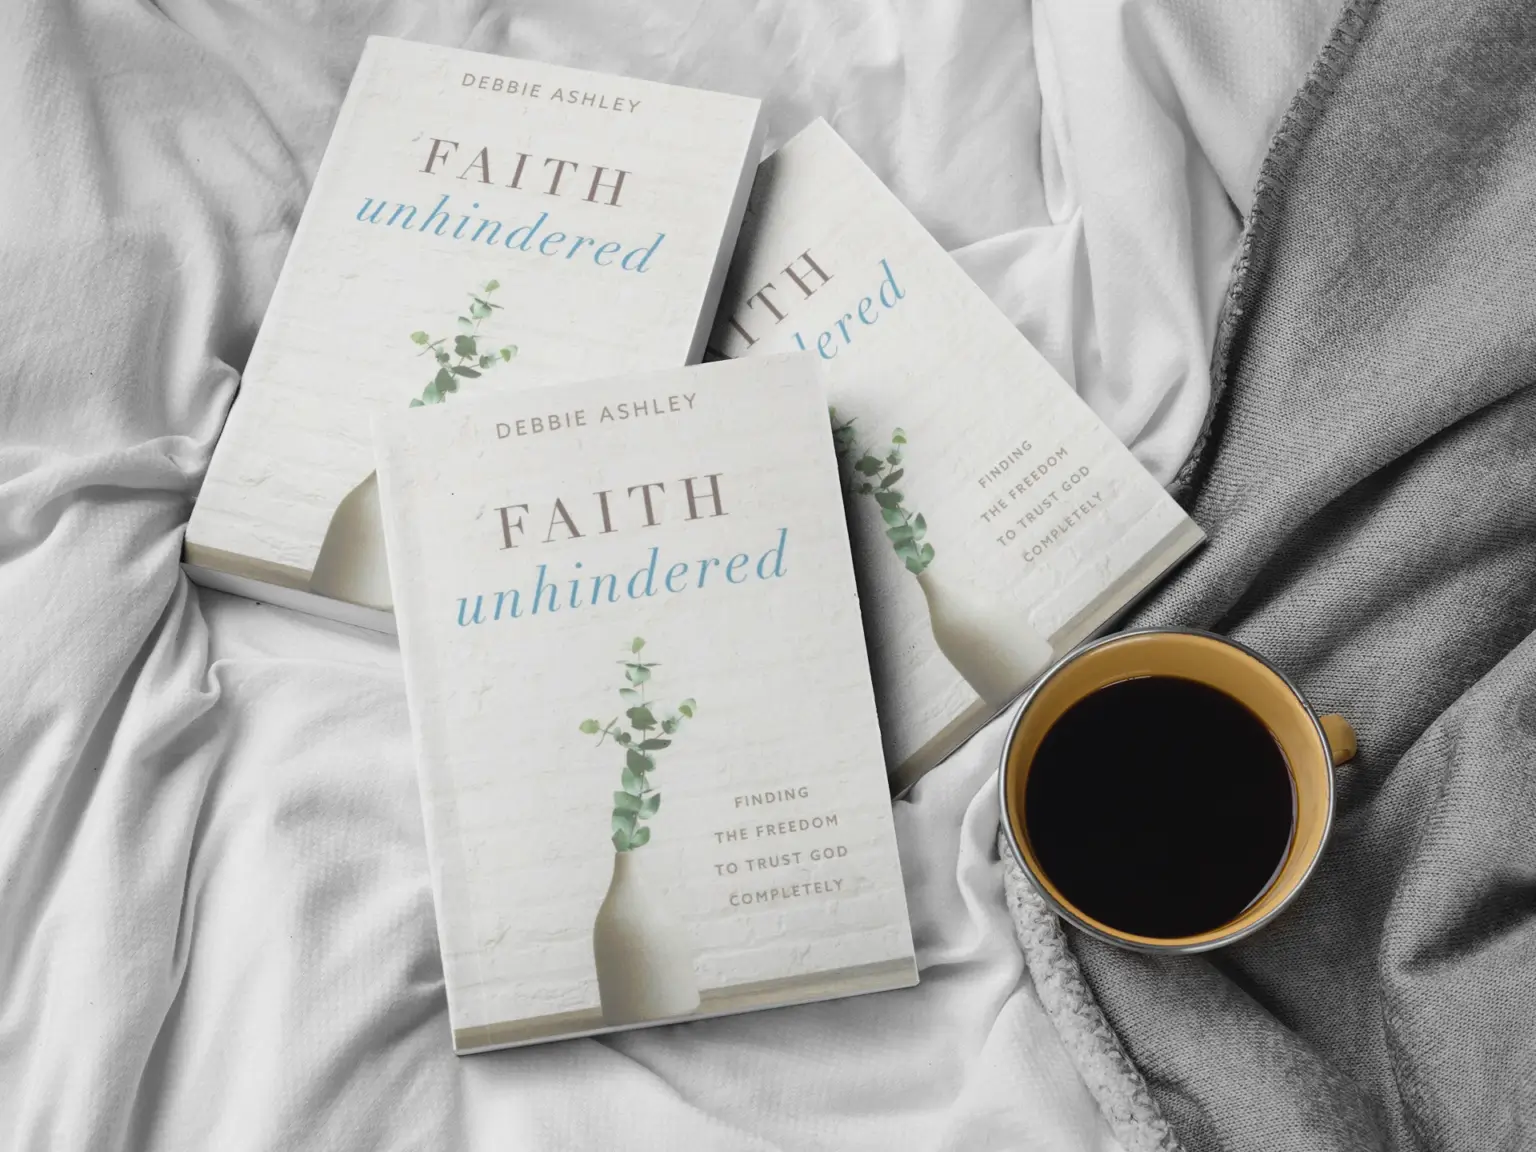 Faith Unhindered by Debbie Ashley Finding the freedom to trust God completely